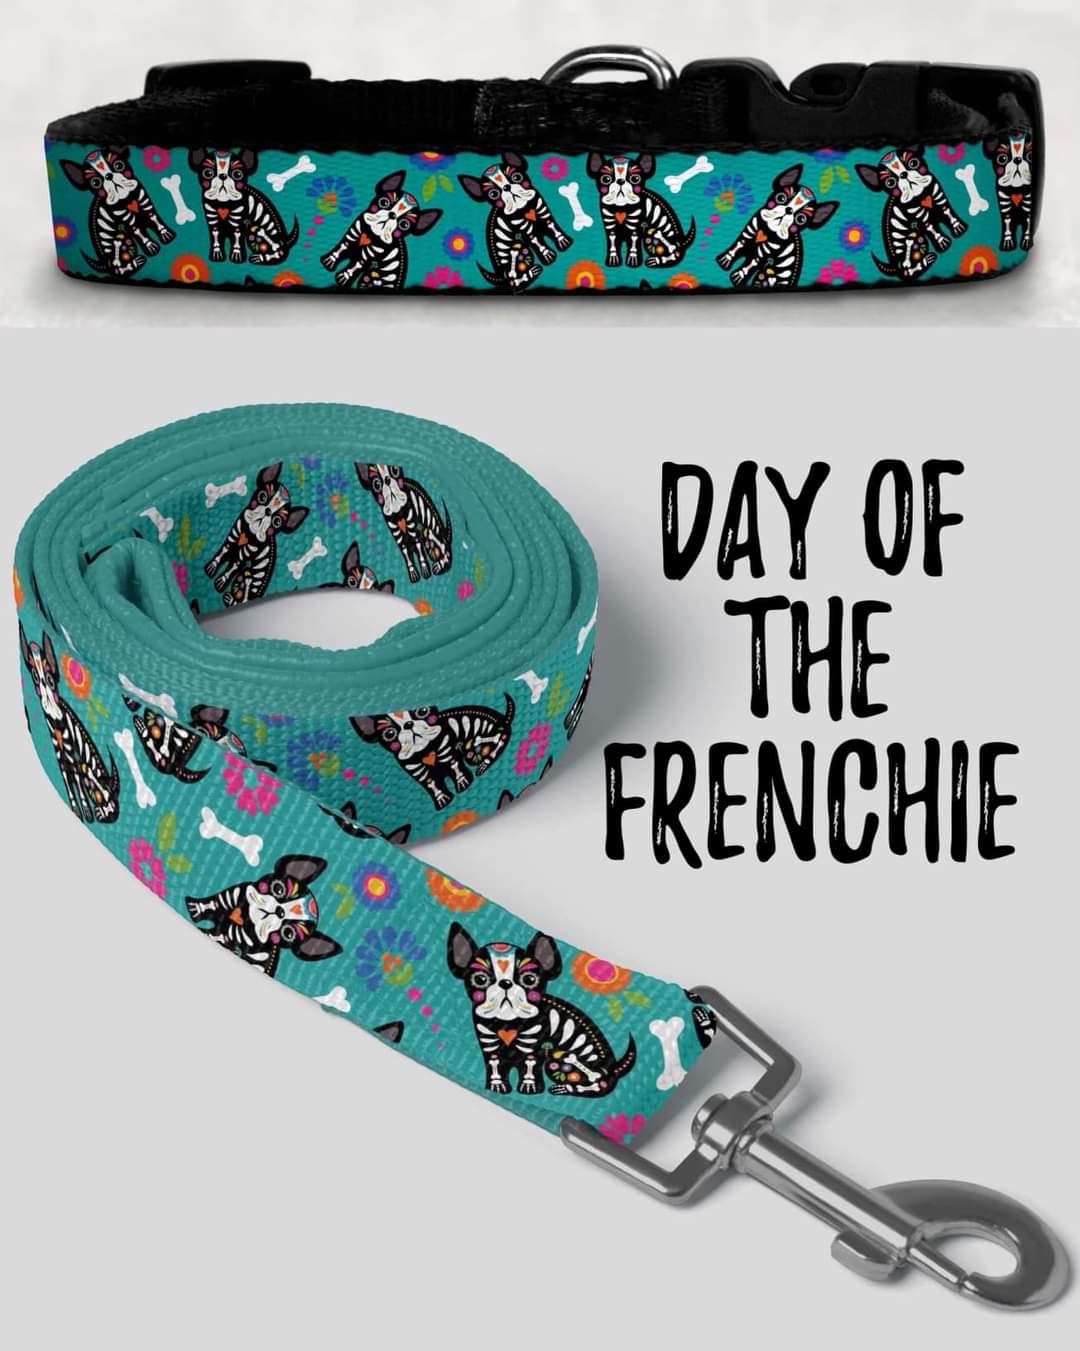 Day of the Frenchie custom leash and collar